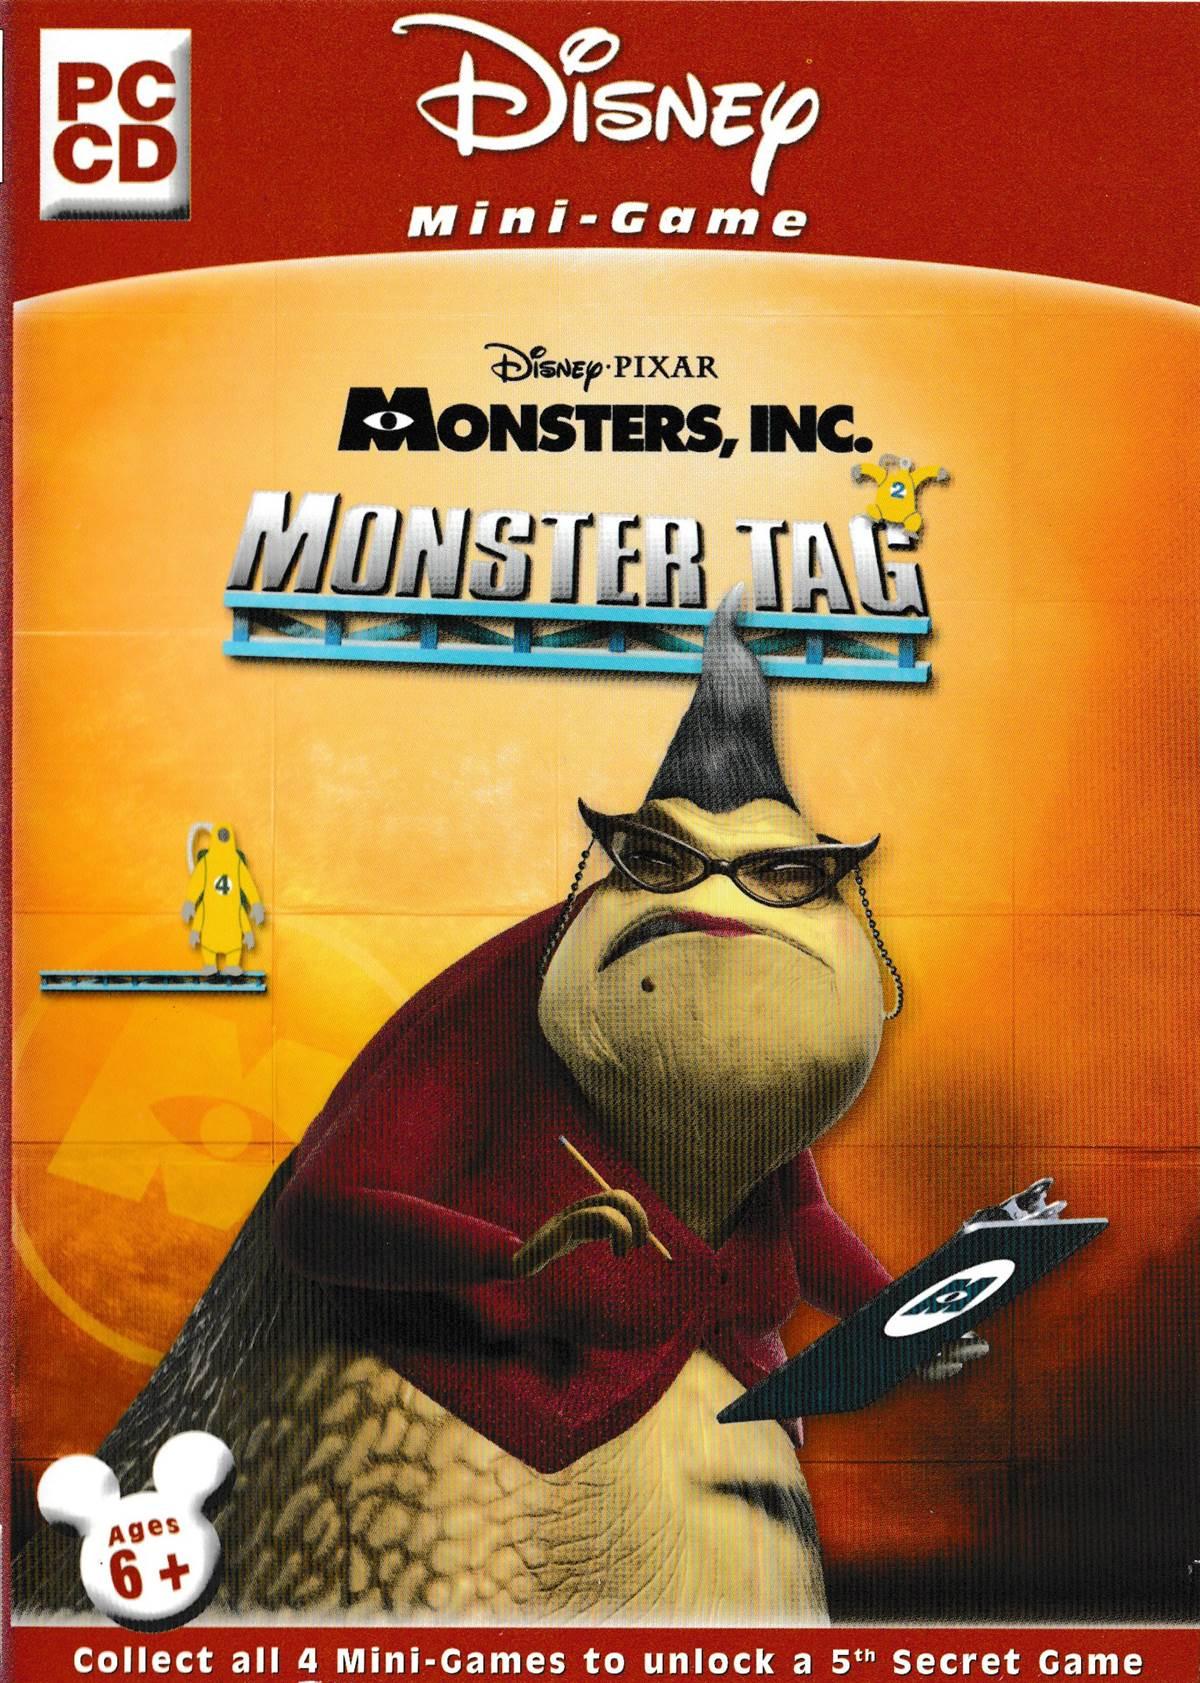 Monsters Inc. Monster Tag - Classic Windows PC Game